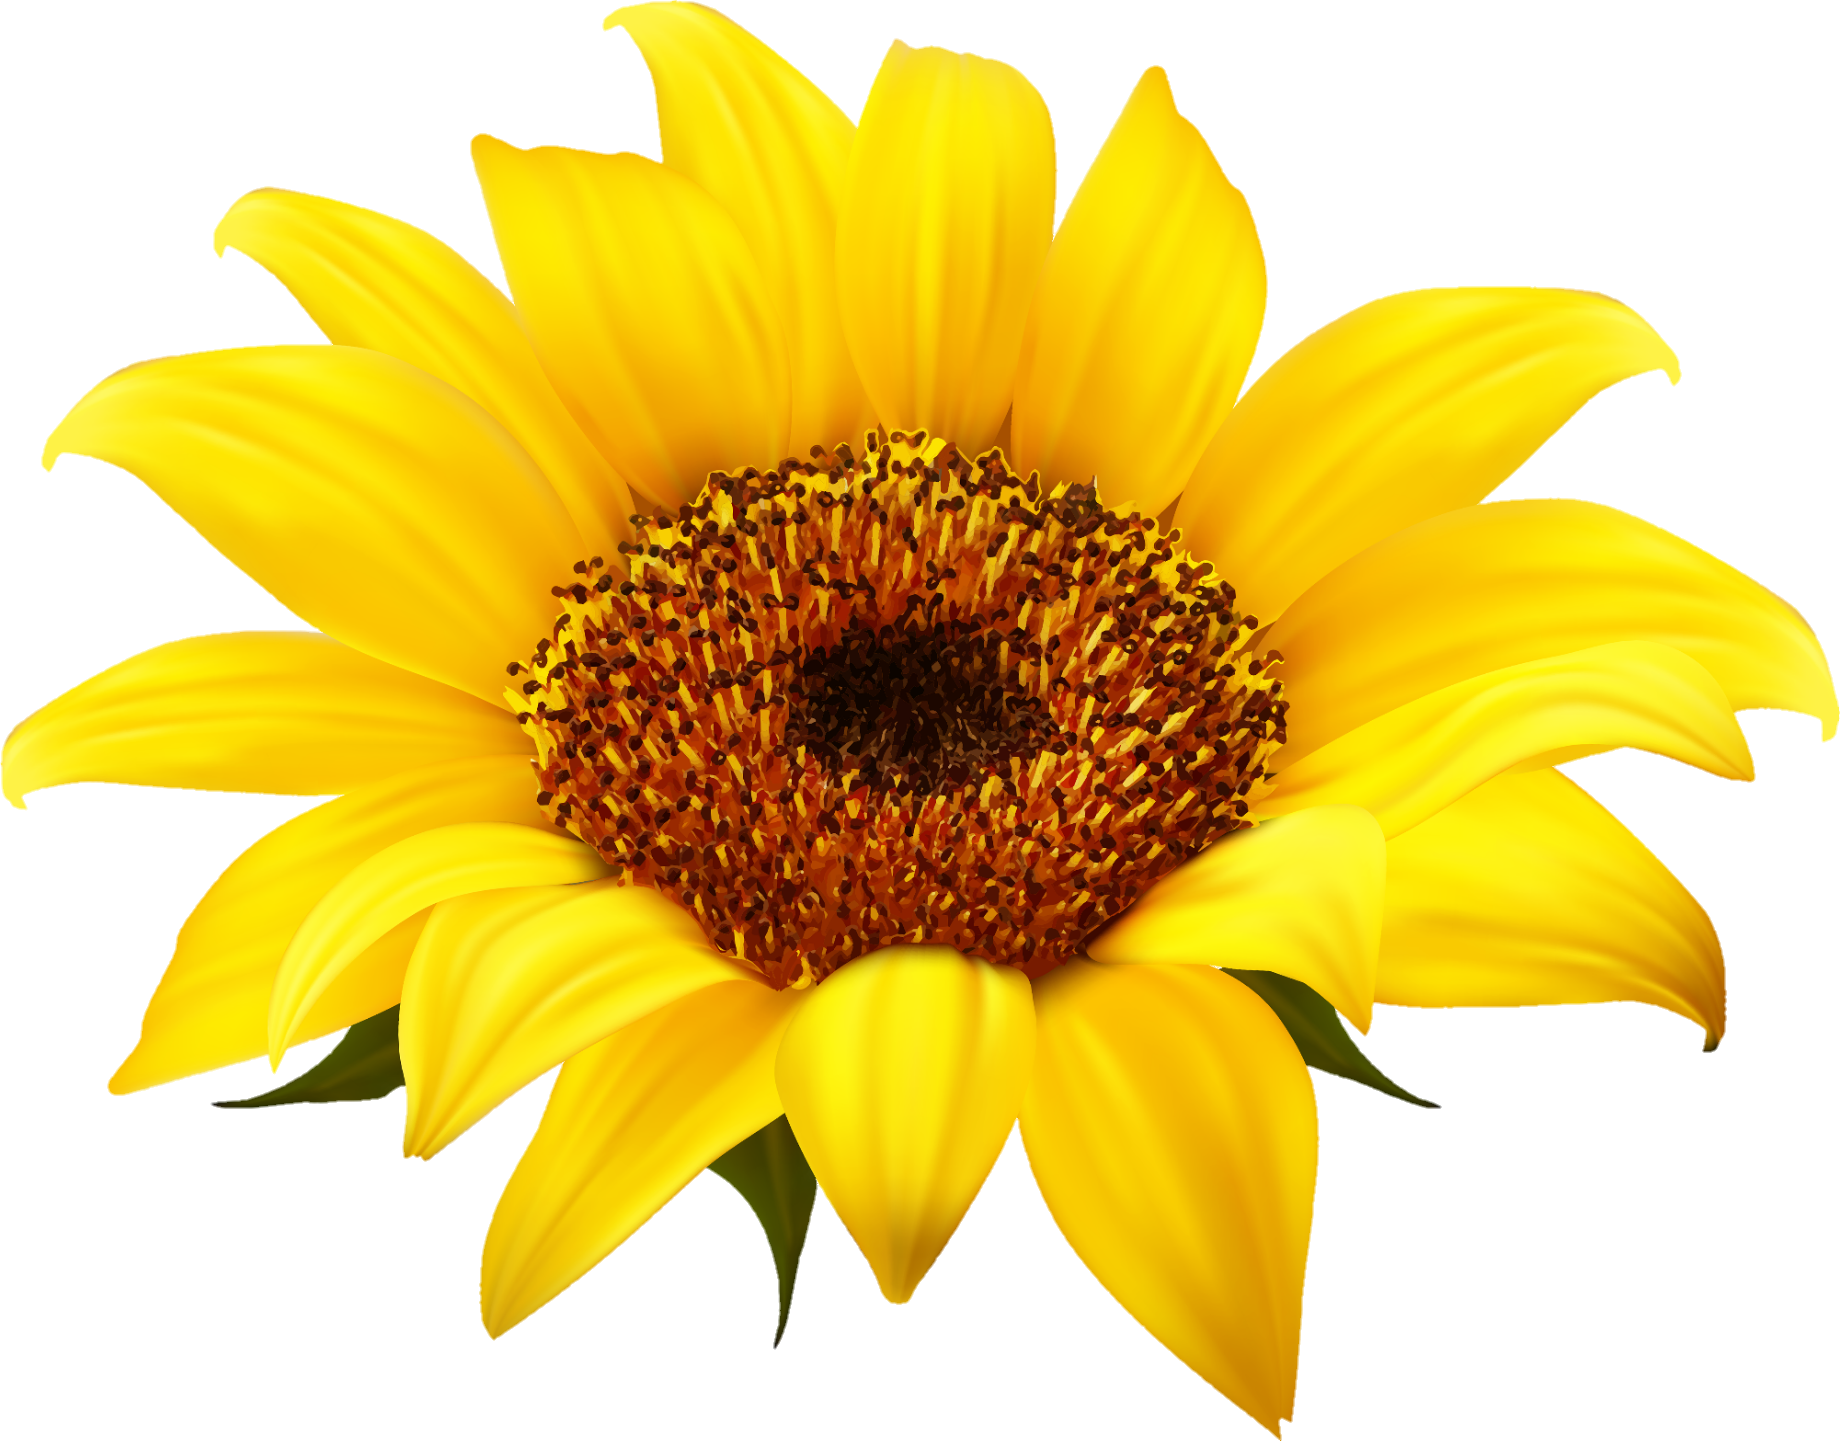 sunflower-png-image-from-pngfre-10-1